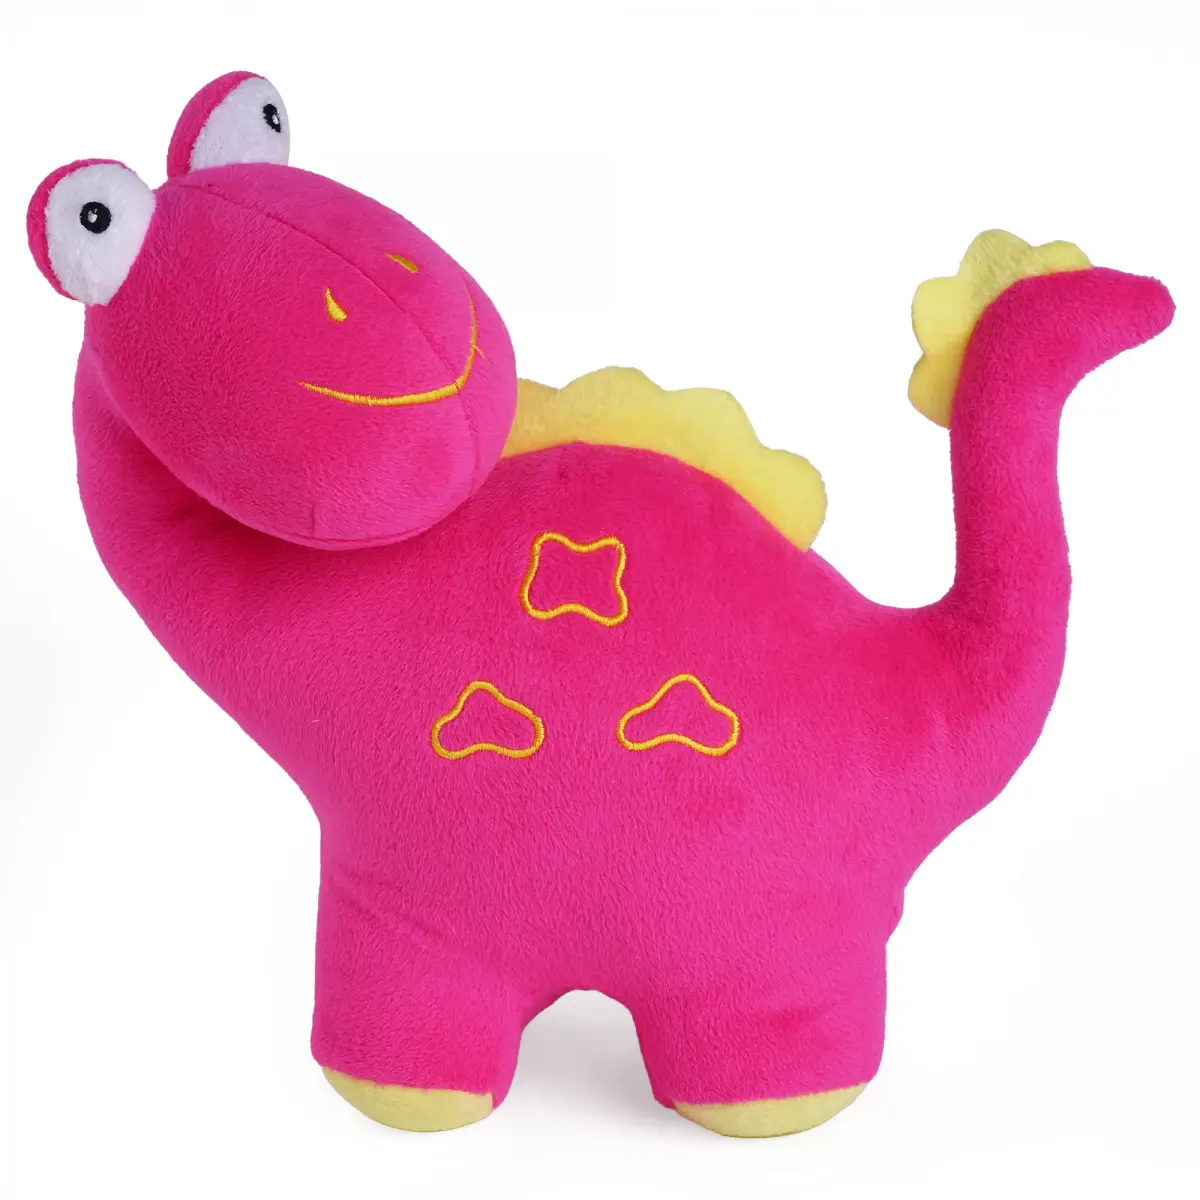 Huggable Cuddly Raxy Dino Stuffed Toy By Fuzzbuzz, Soft Toys for Kids, Cute Plushies Pink, For Kids Of Age 2 Years & Above, 26cm